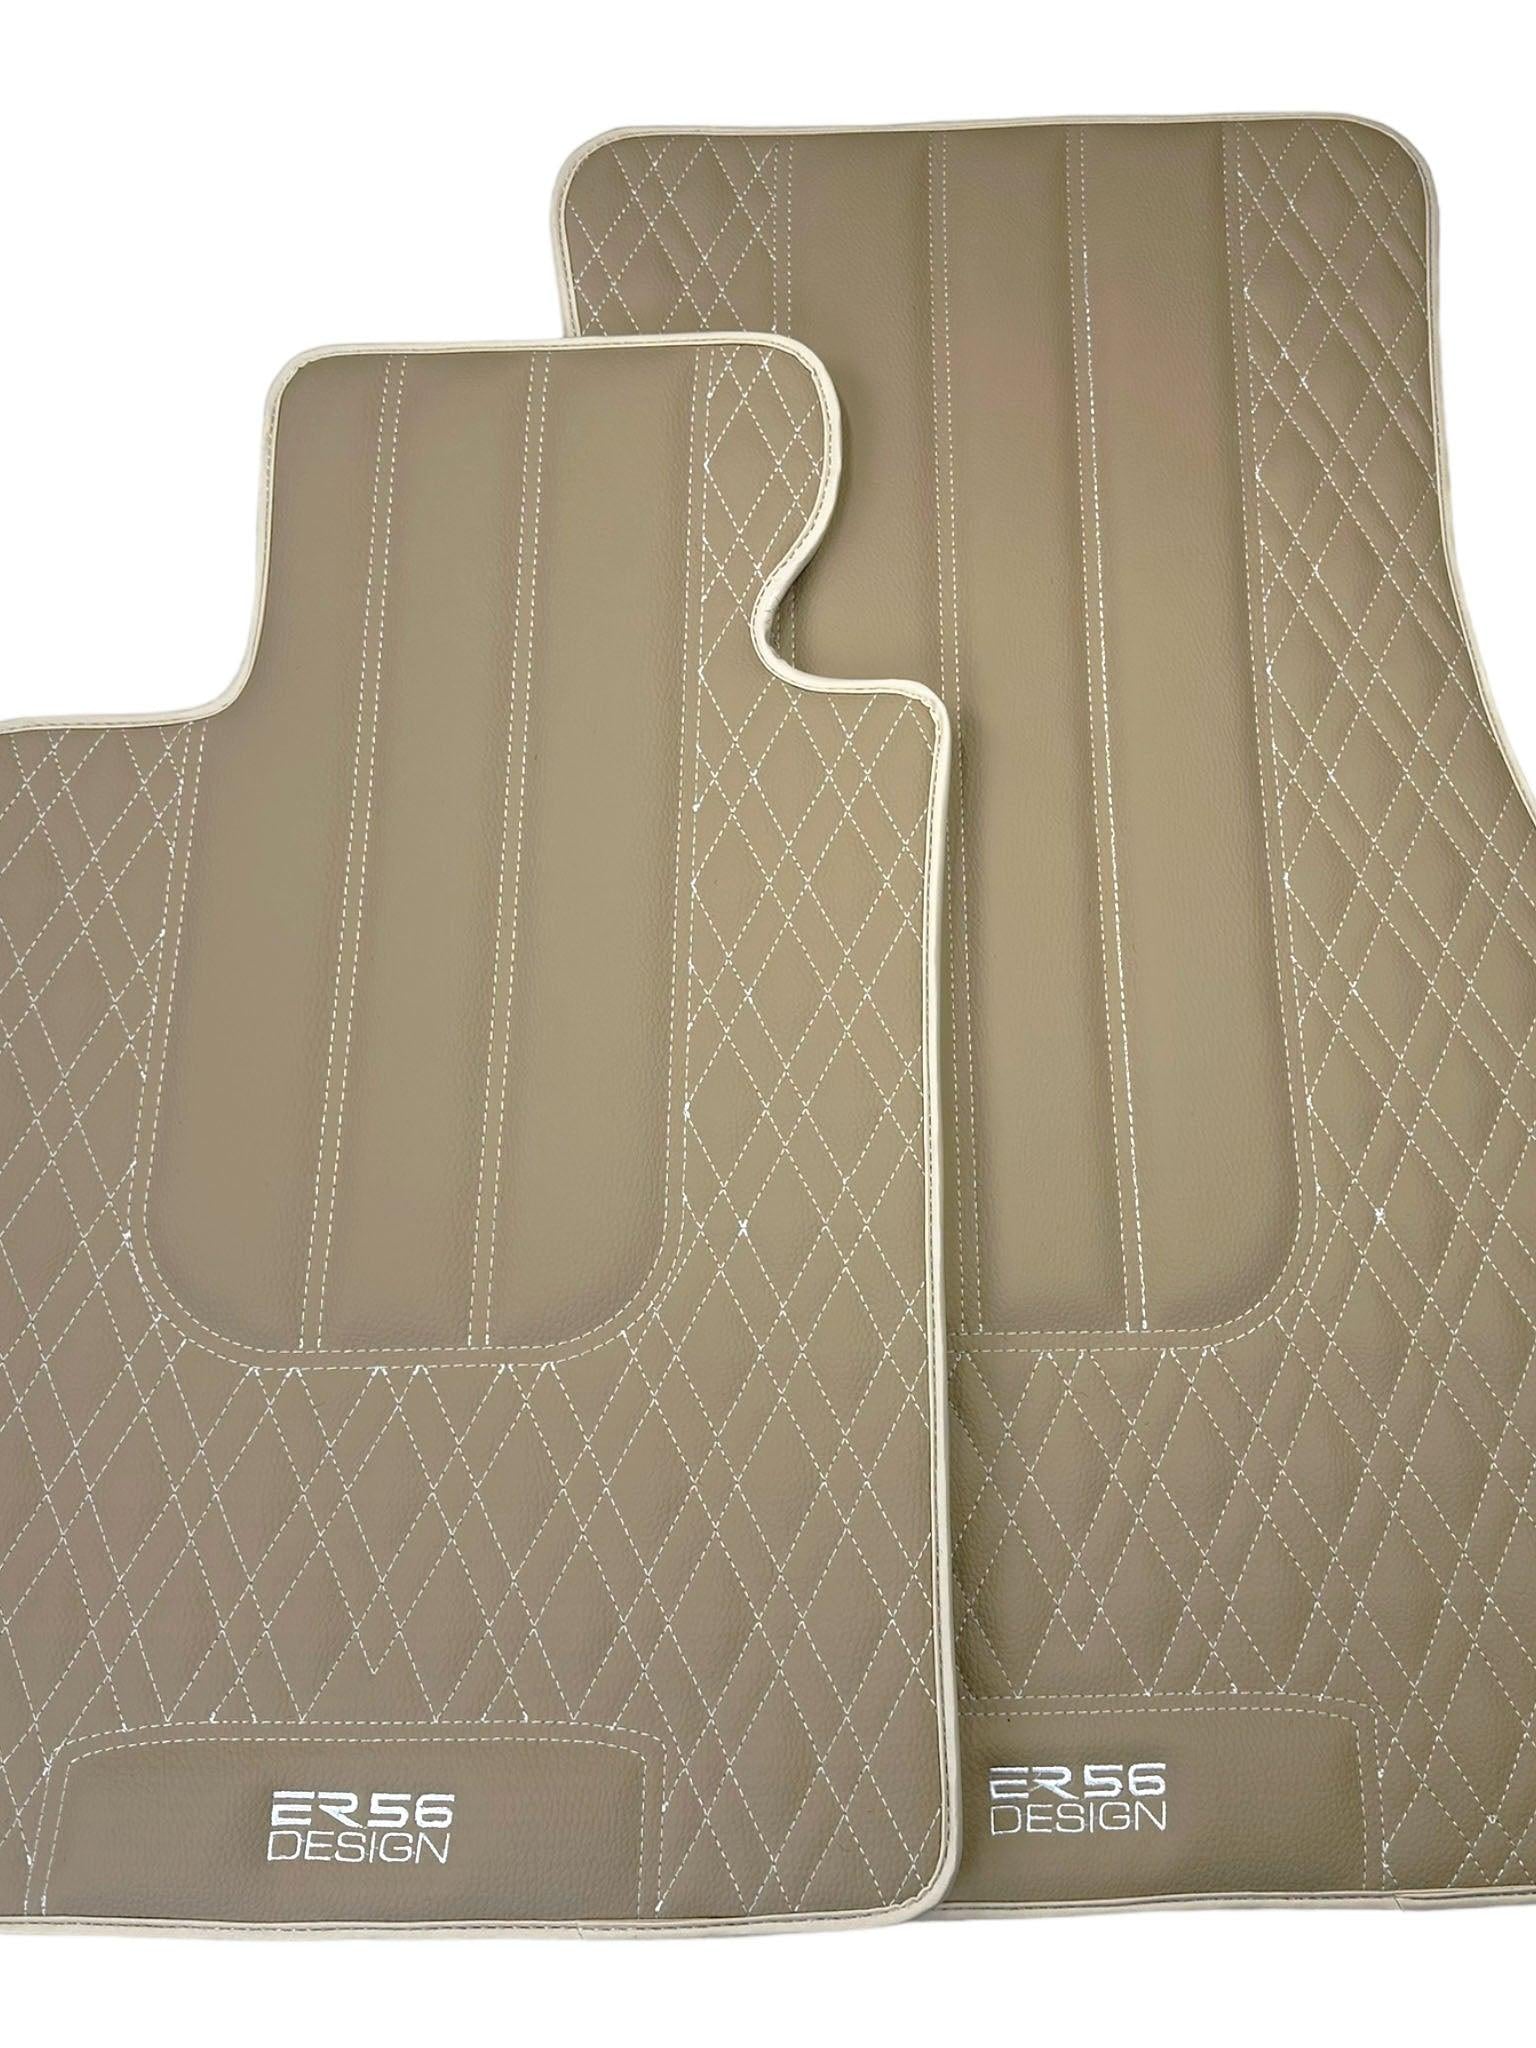 Beige Leather Floor Floor Mats For BMW 6 Series F06 Gran Coupe | Fighter Jet Edition AutoWin Brand |Sky Blue Trim